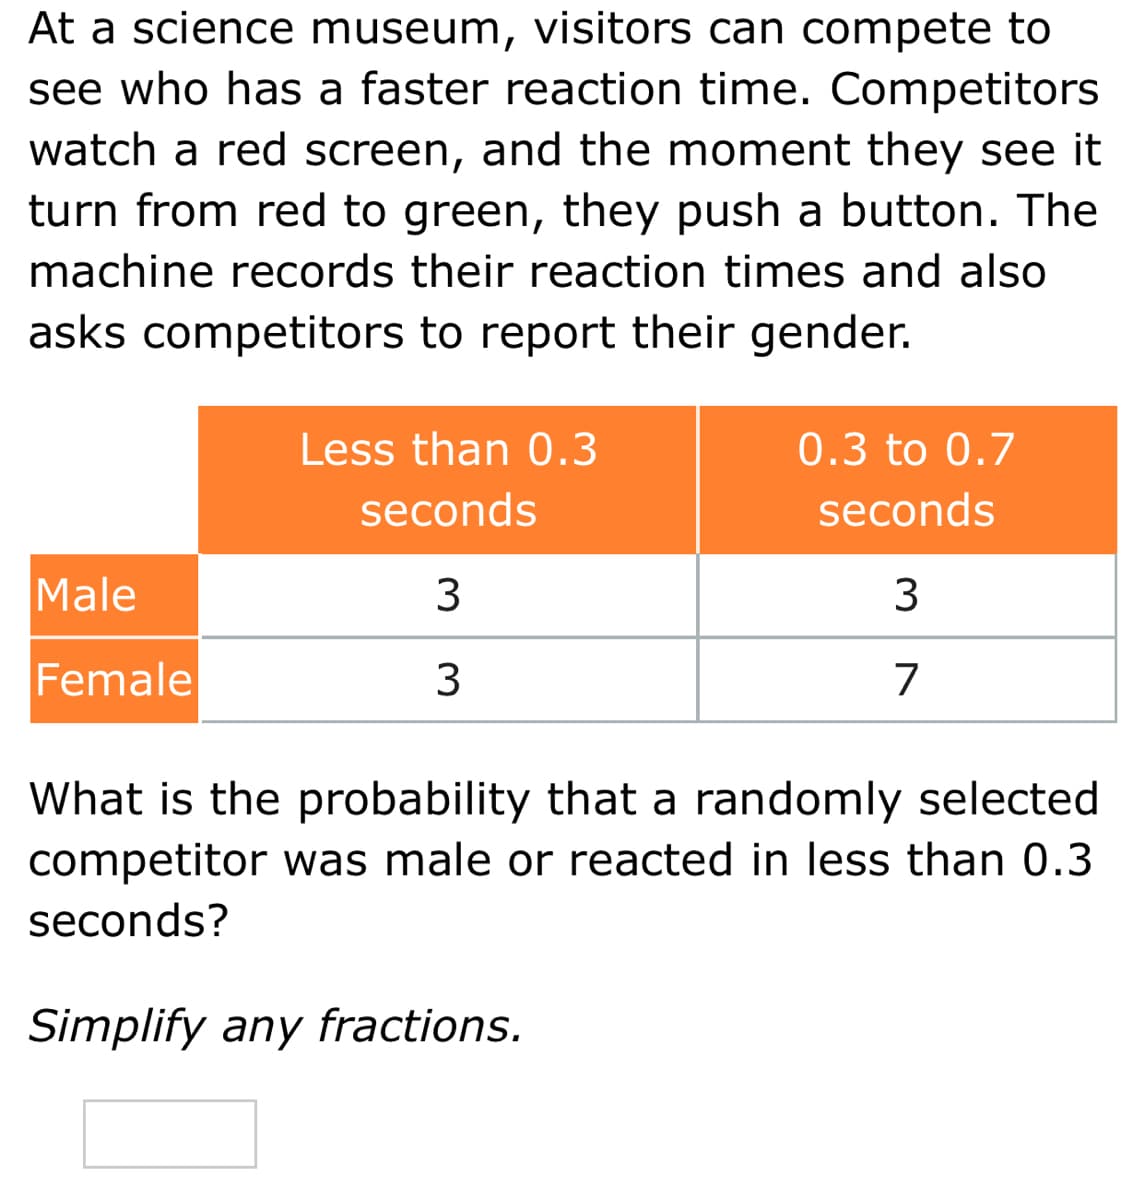 At a science museum, visitors can compete to
see who has a faster reaction time. Competitors
watch a red screen, and the moment they see it
turn from red to green, they push a button. The
machine records their reaction times and also
asks competitors to report their gender.
Less than 0.3
0.3 to 0.7
seconds
seconds
Male
3
3
Female
3
7
What is the probability that a randomly selected
competitor was male or reacted in less than 0.3
seconds?
Simplify any fractions.
